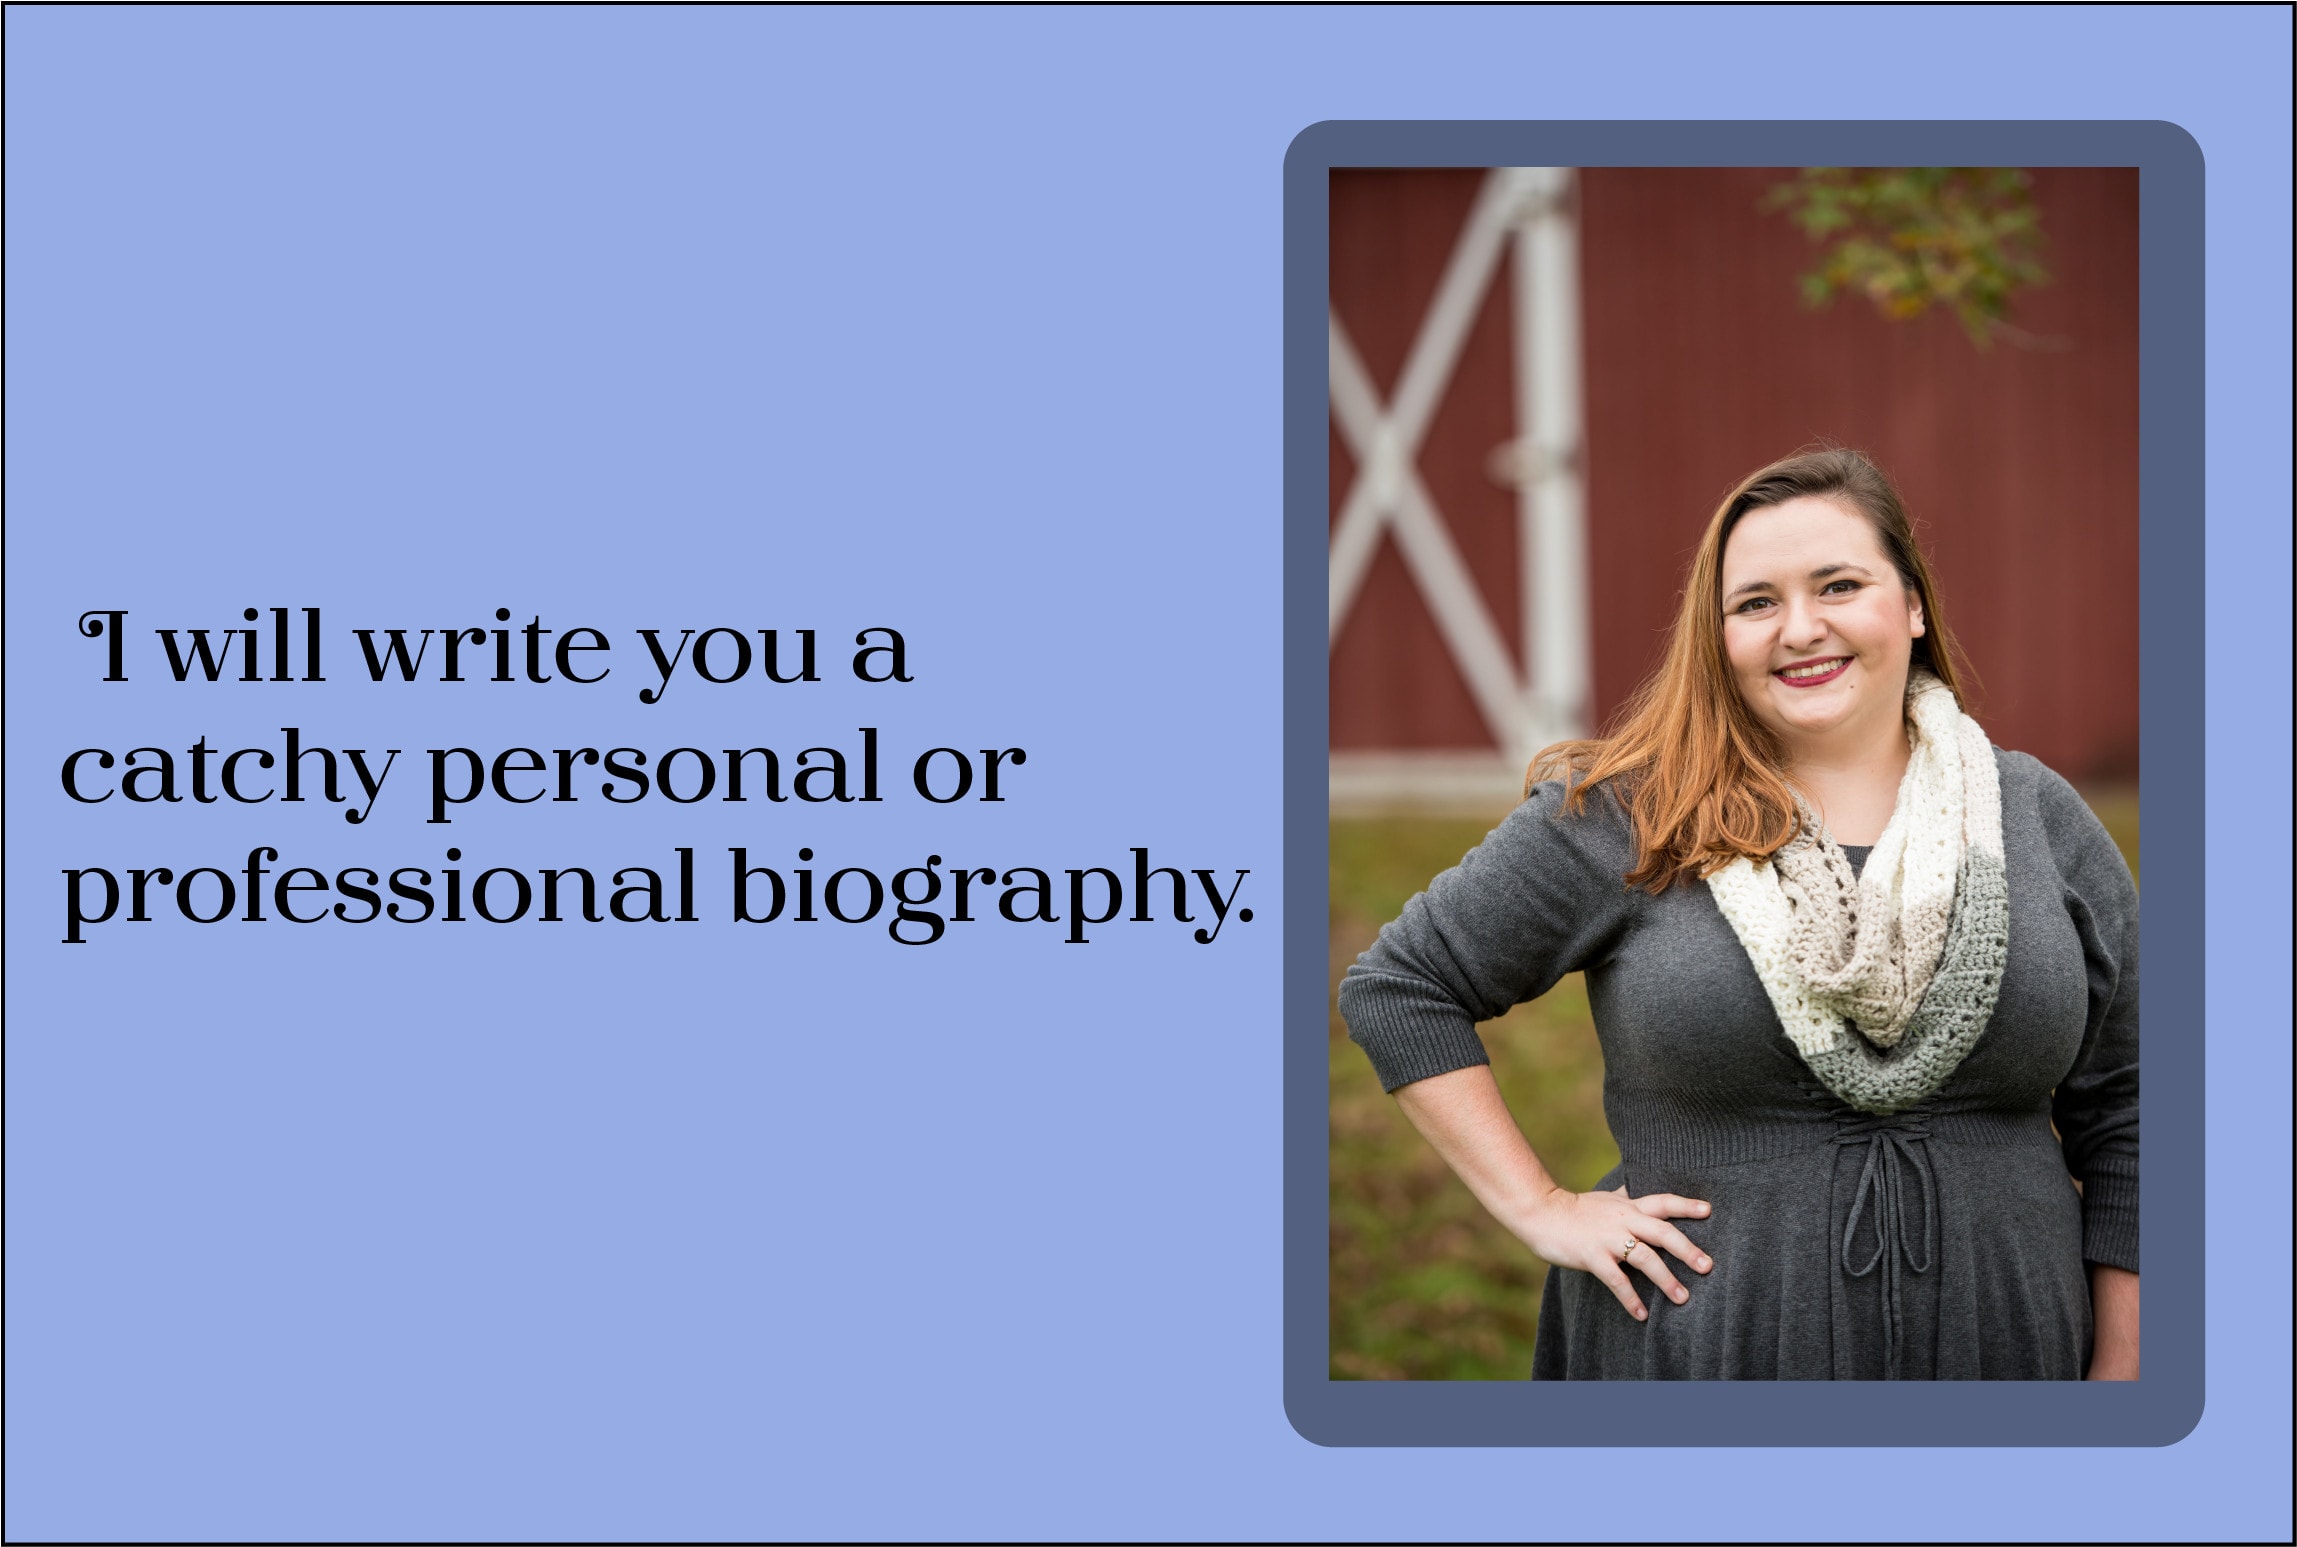 Write you a catchy personal or professional biography by Kaylak23